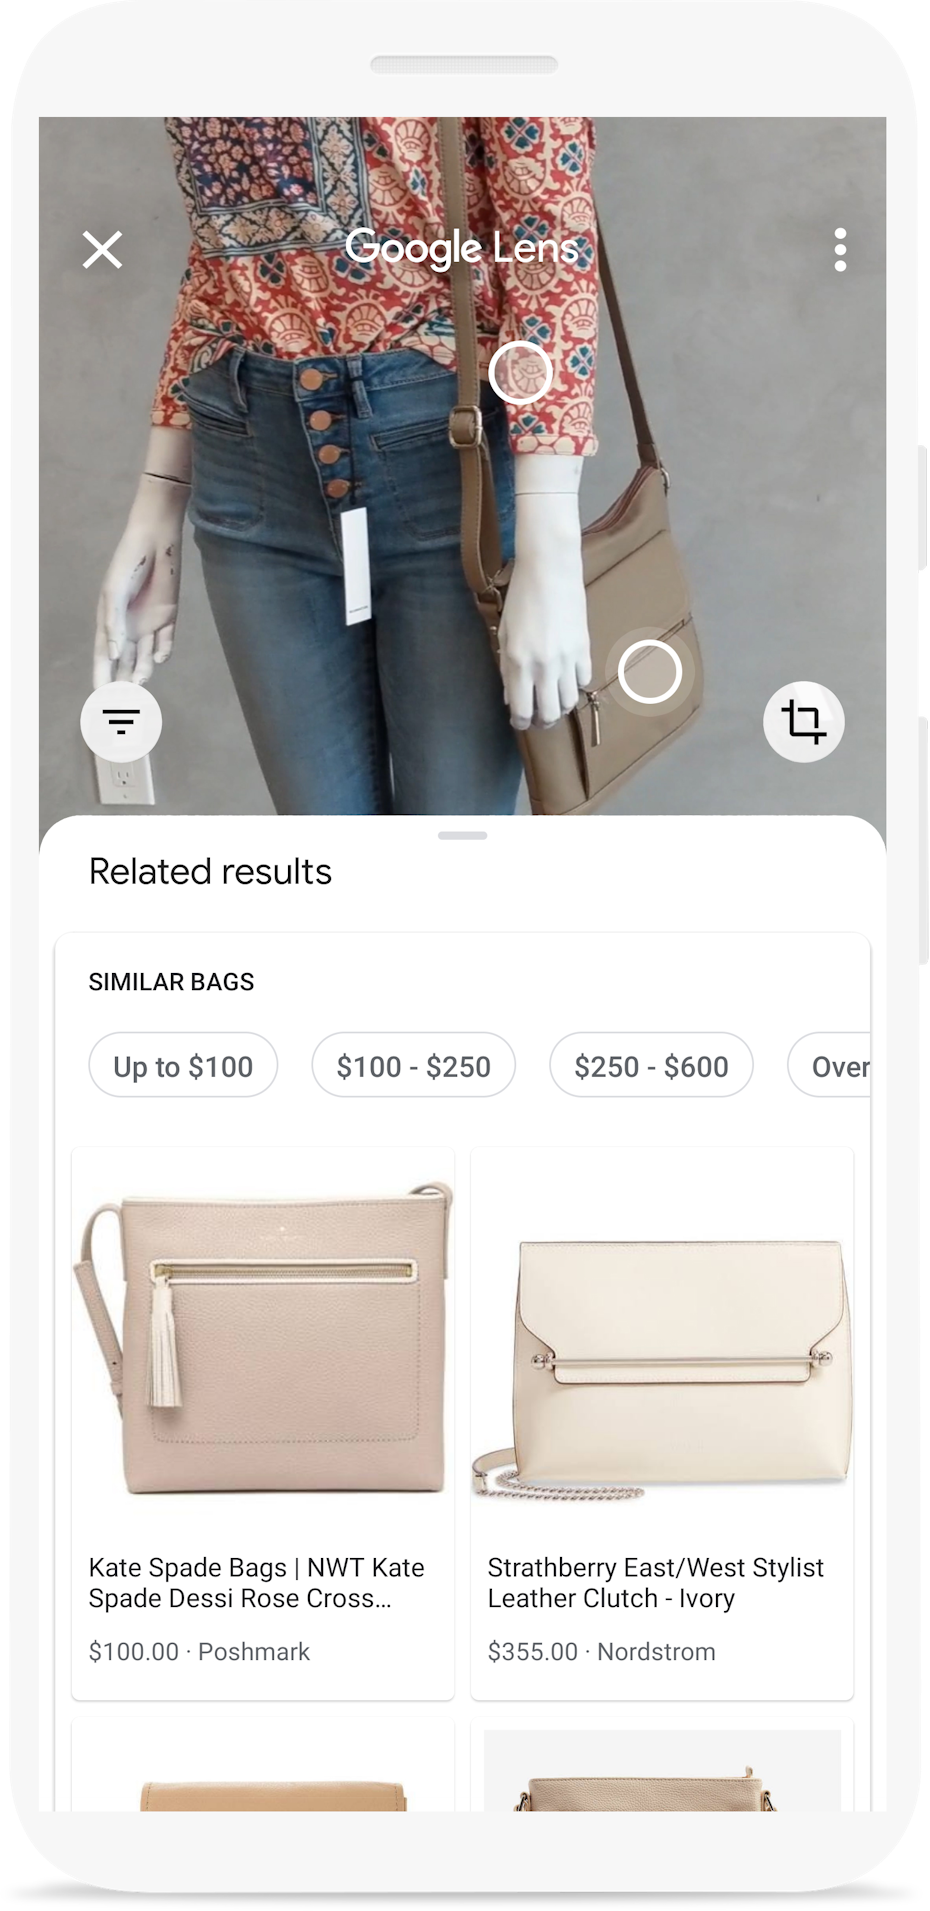 Google Lens promotional image on product search